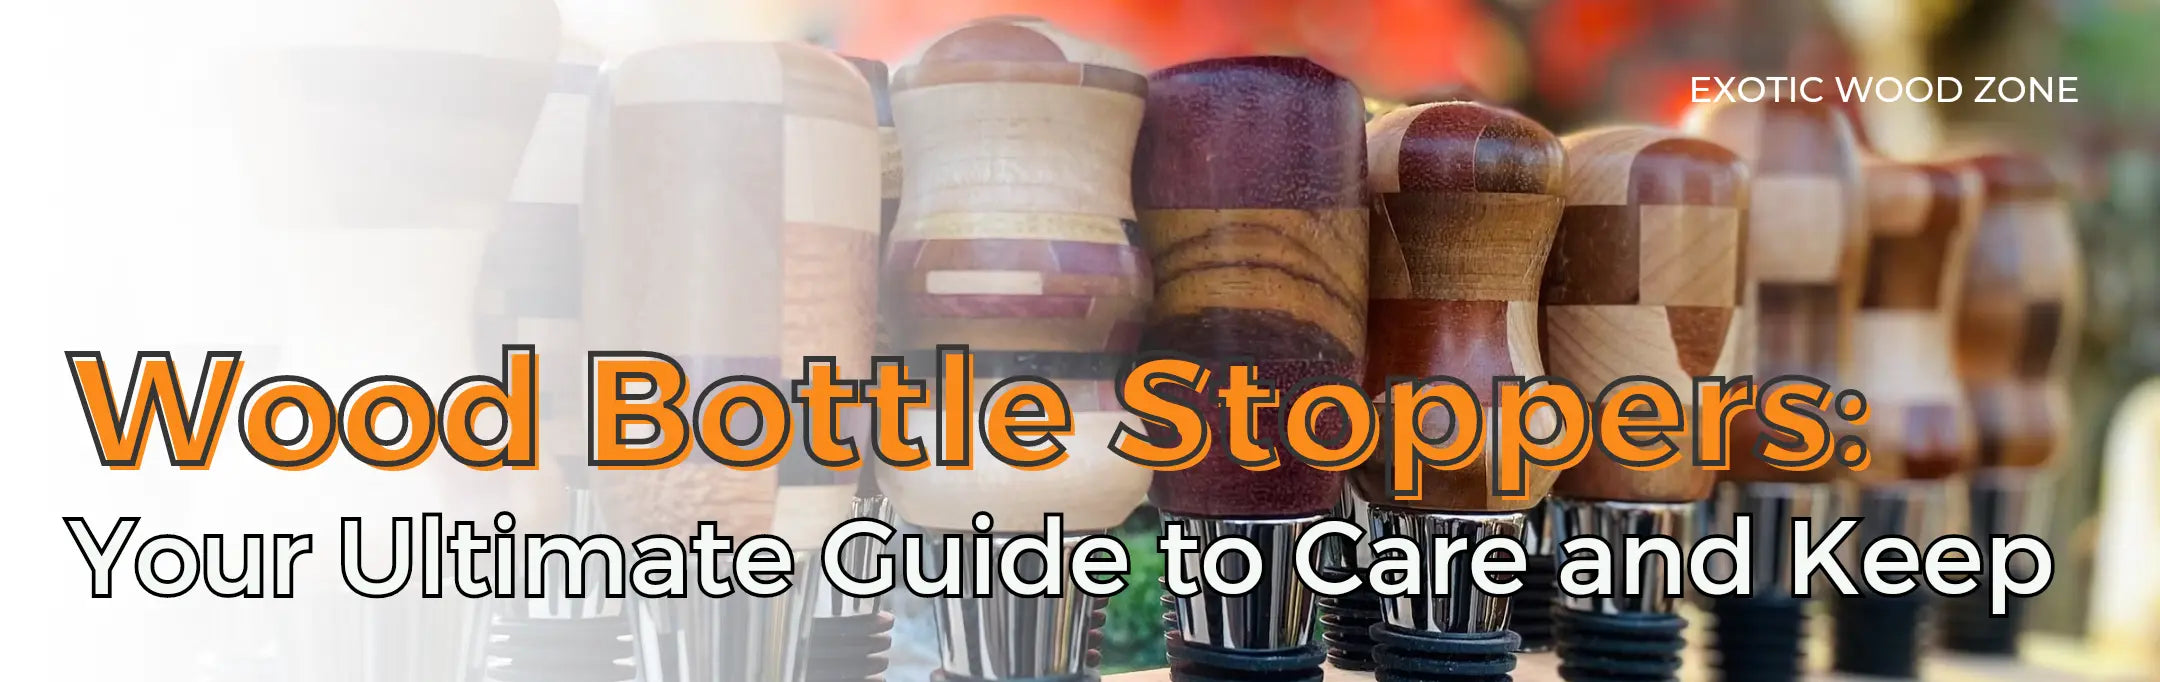 Wood-Bottle-Stoppers-Your-Ultimate-Guide-to-Care-and-Keep Exotic Wood Zone